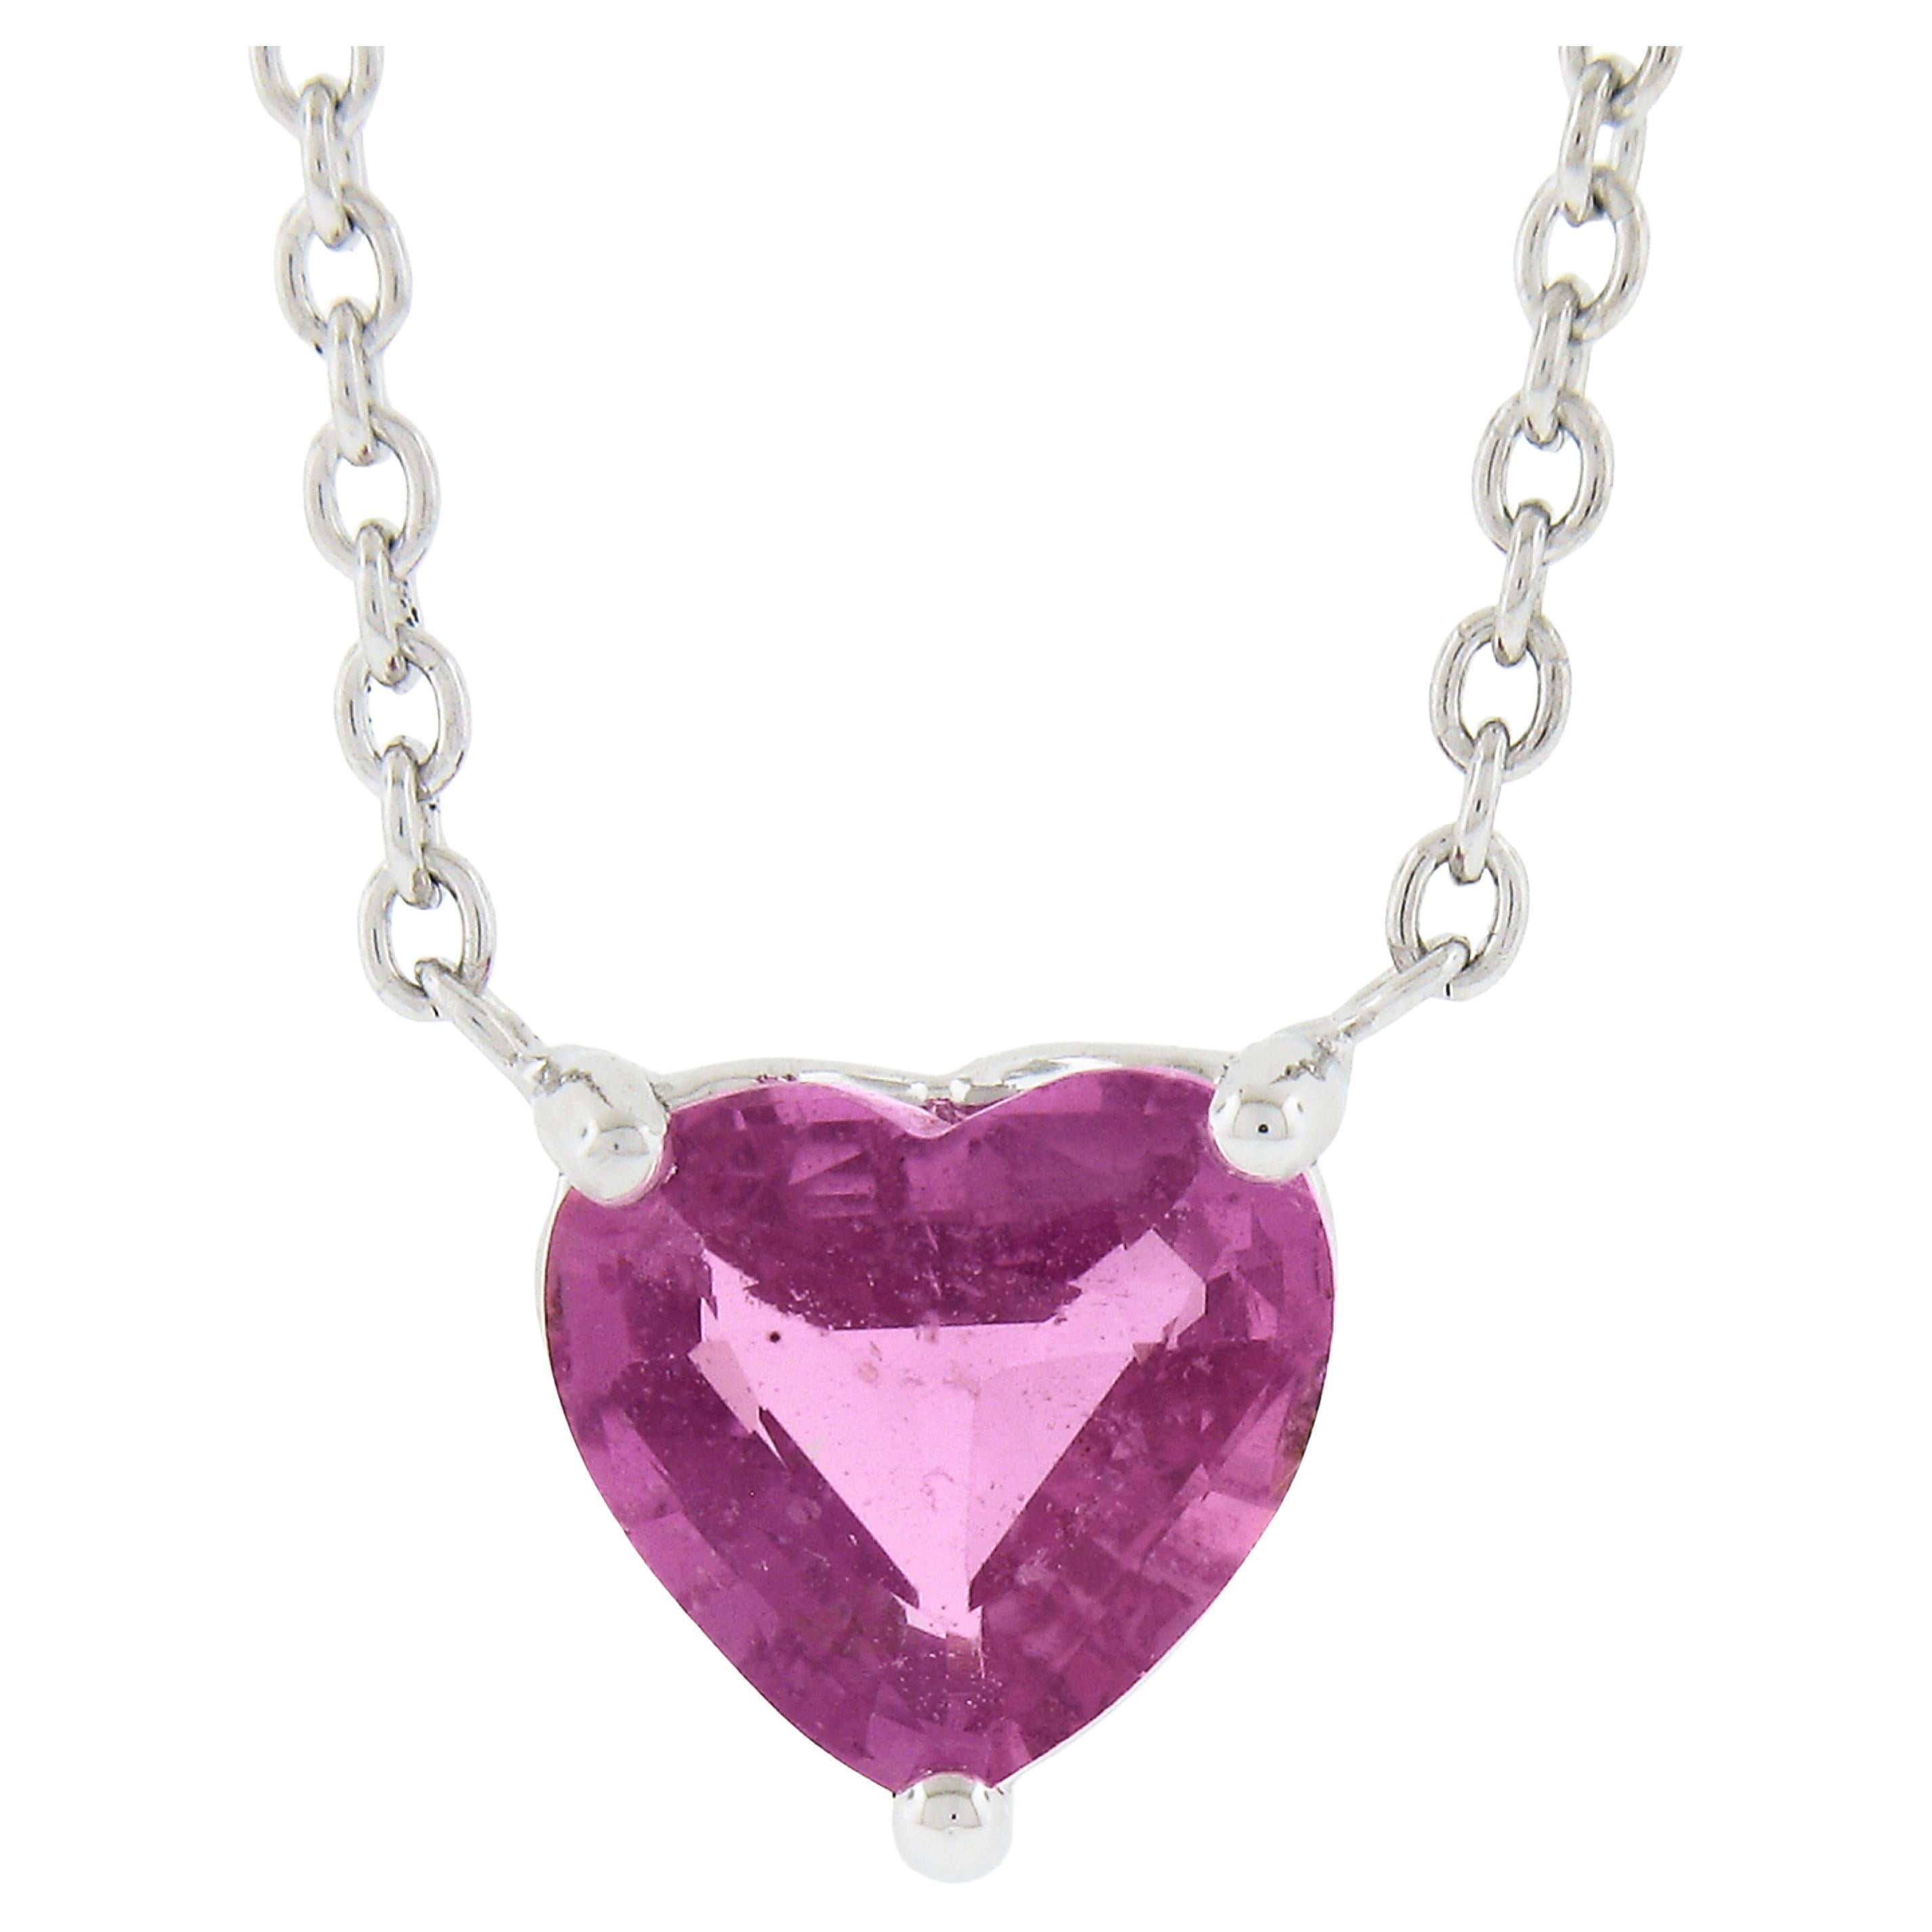 NEW Platinum 1.54ct GIA Heart Pink Sapphire Pendant Adjustable 16"/18" Necklace For Sale